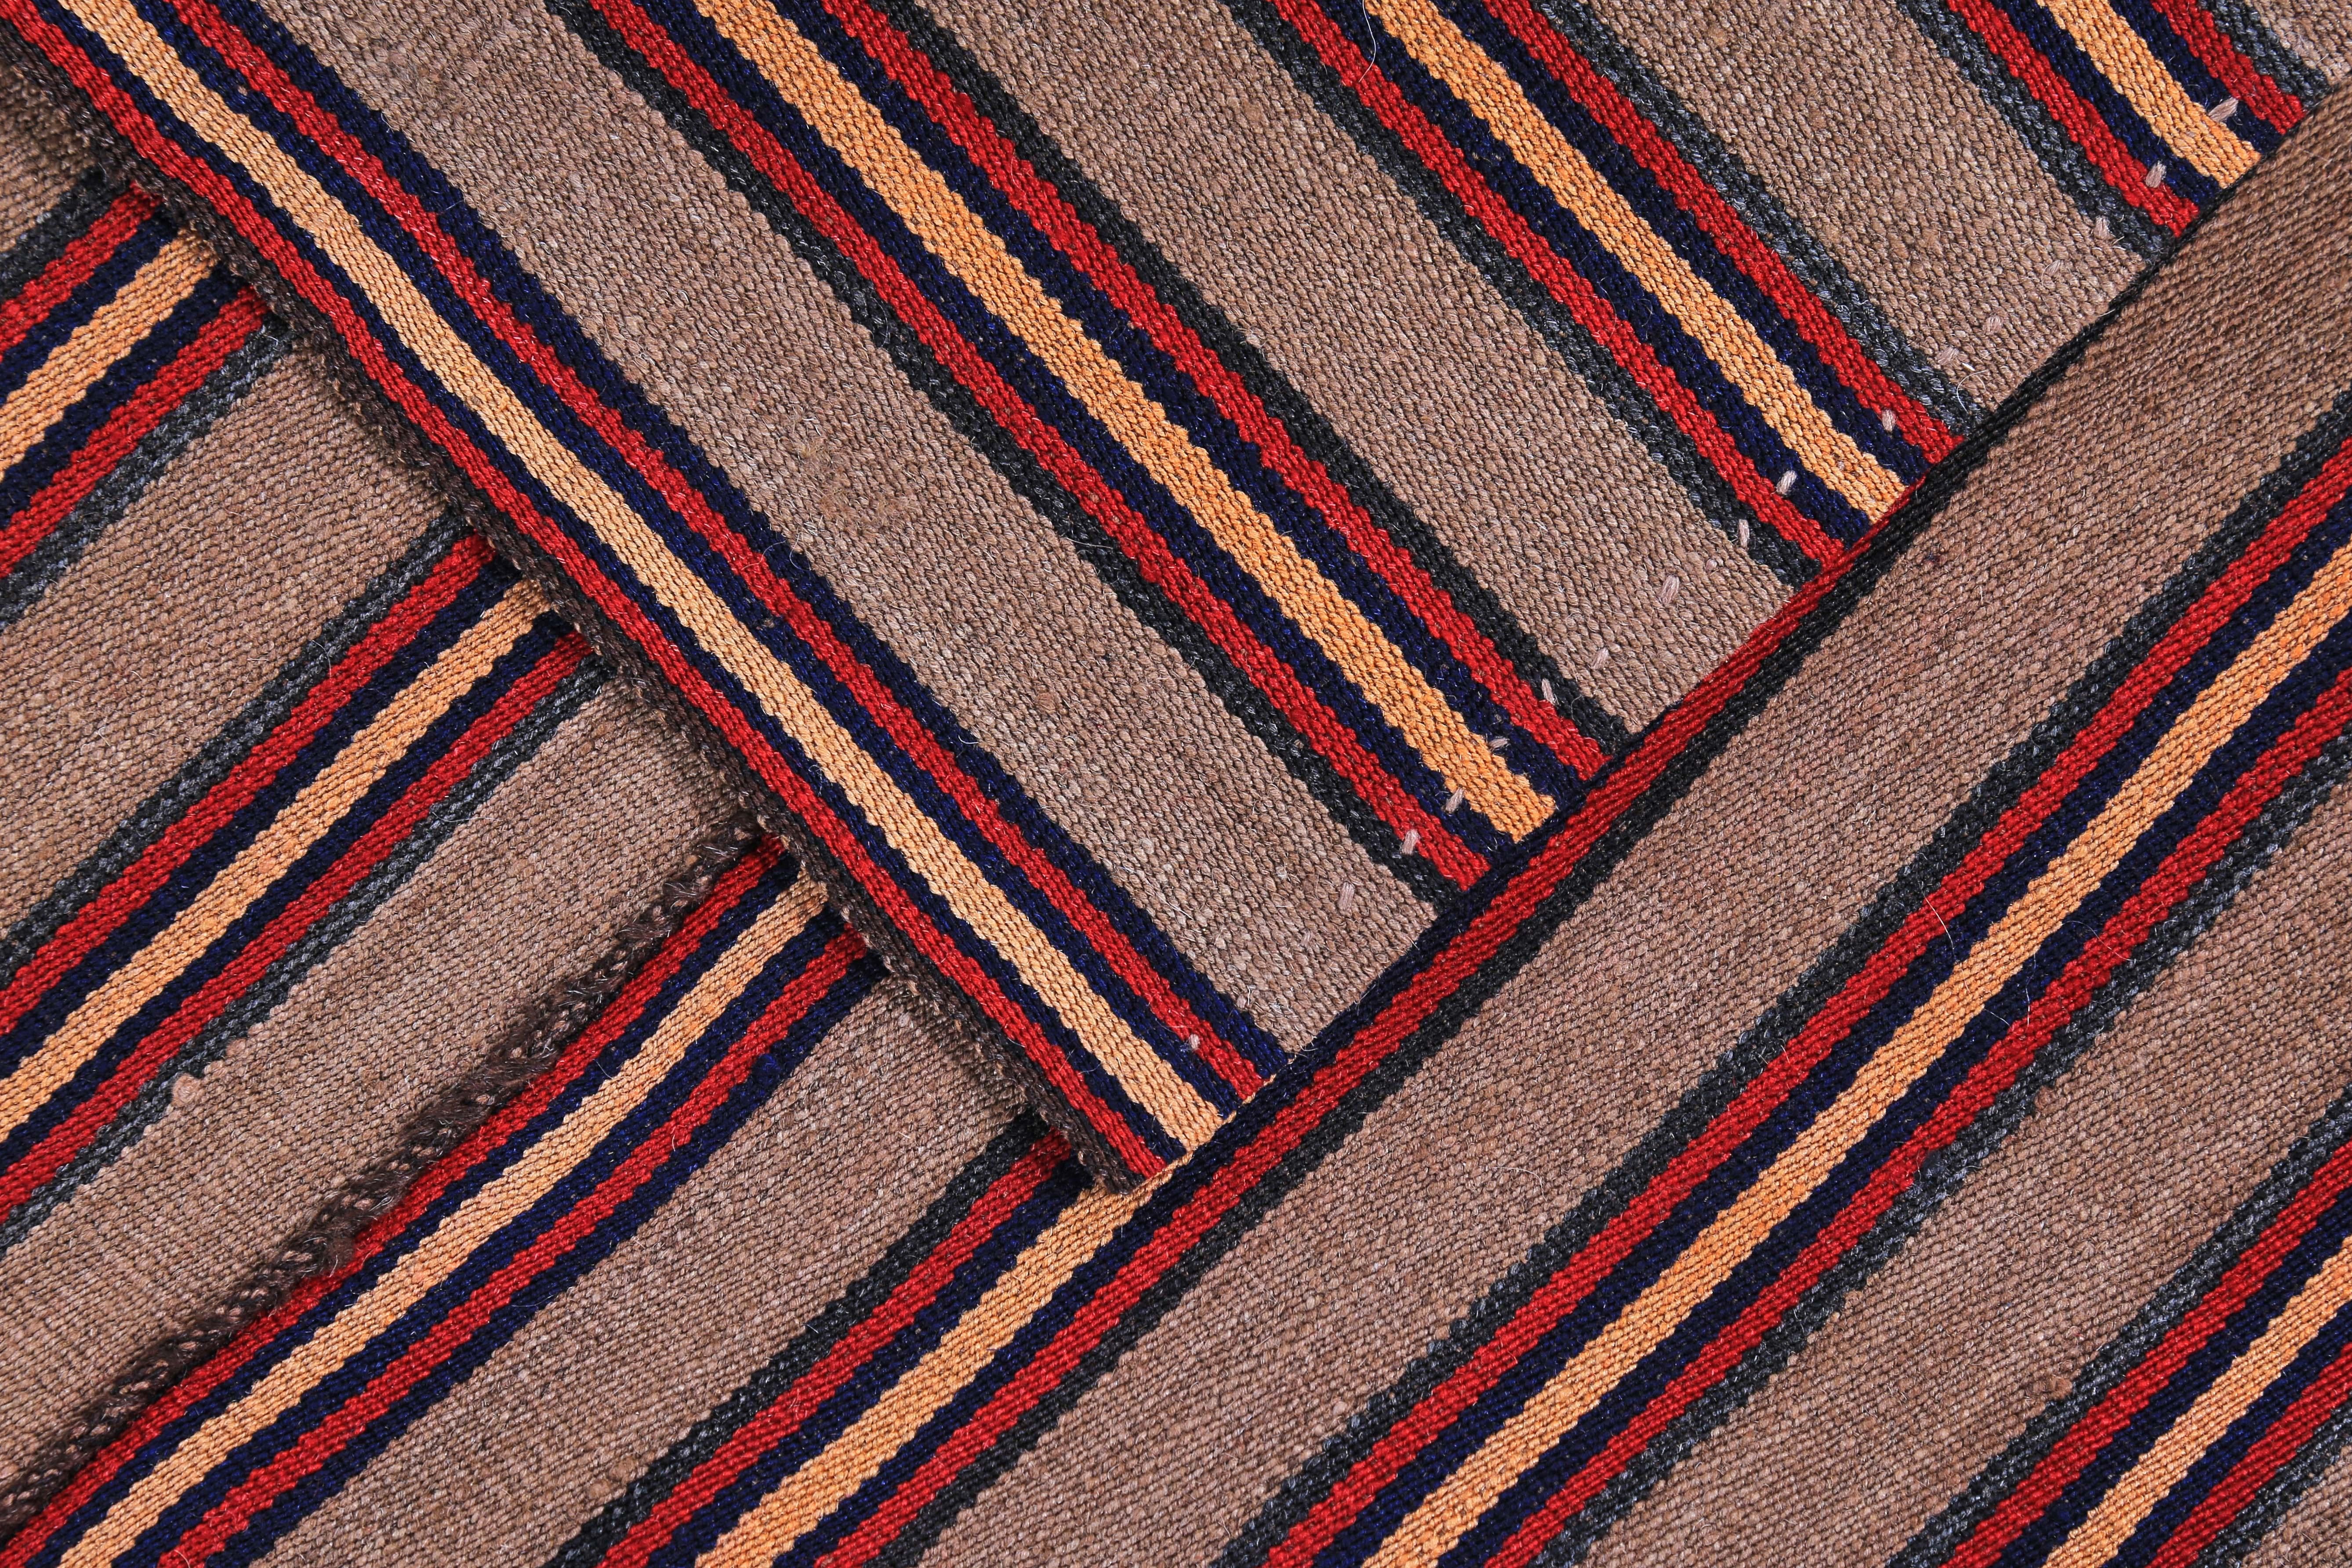 Modern Turkish Kilim Rug with Red, Orange & Black Pencil Stripes in Beige Field In New Condition For Sale In Dallas, TX